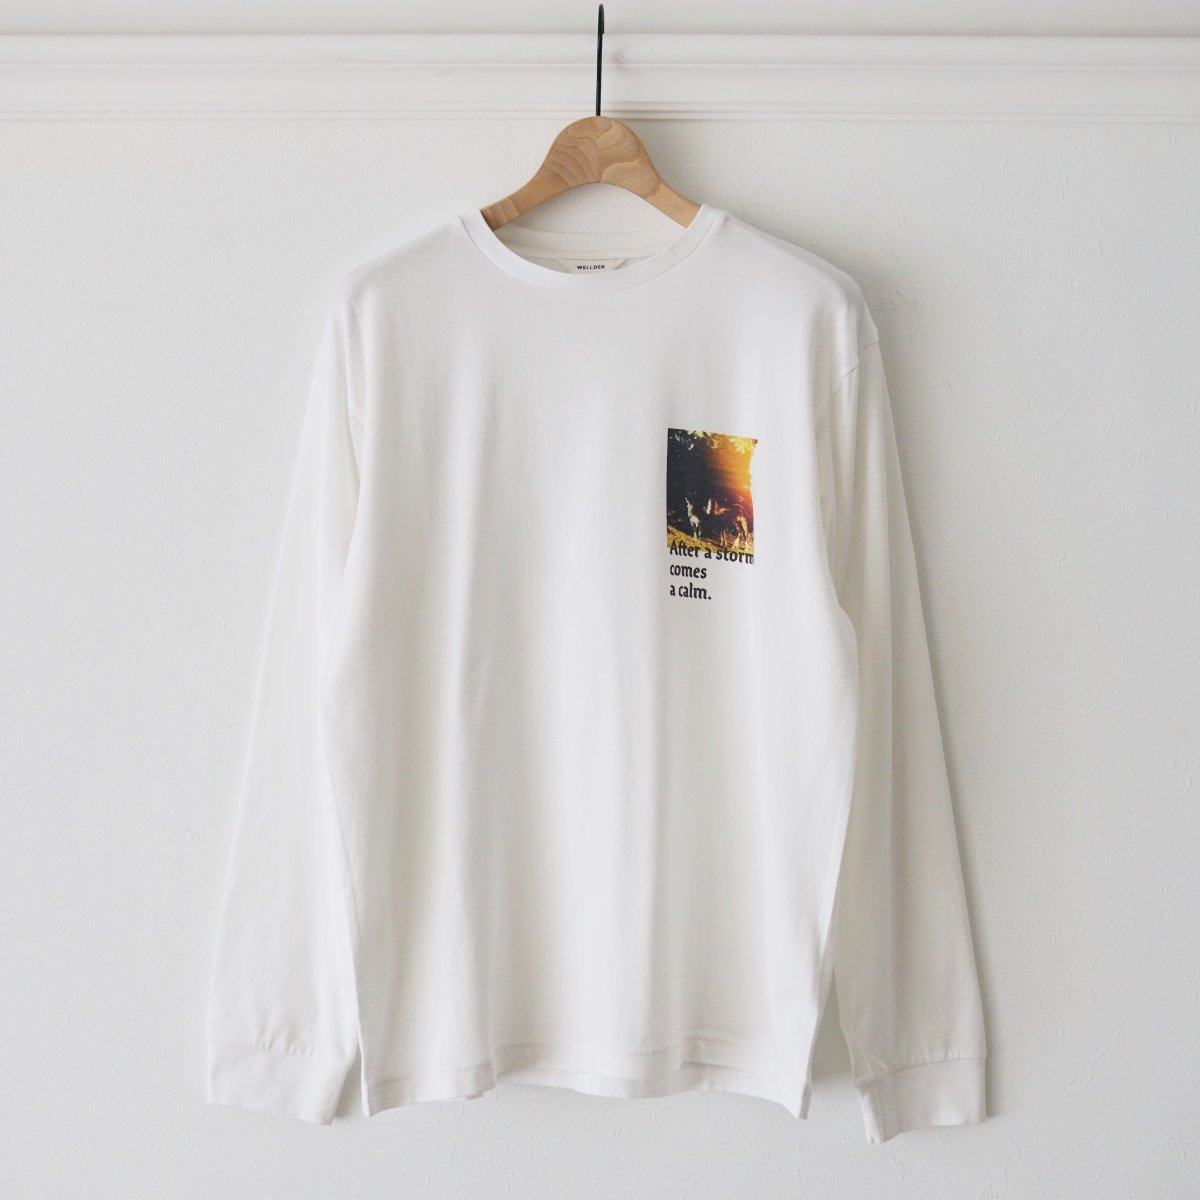 <img class='new_mark_img1' src='https://img.shop-pro.jp/img/new/icons20.gif' style='border:none;display:inline;margin:0px;padding:0px;width:auto;' />30%OFFۡWELLDER  CREW NECK LONG SLEEVE T-SHIRT  CALM - WHITE